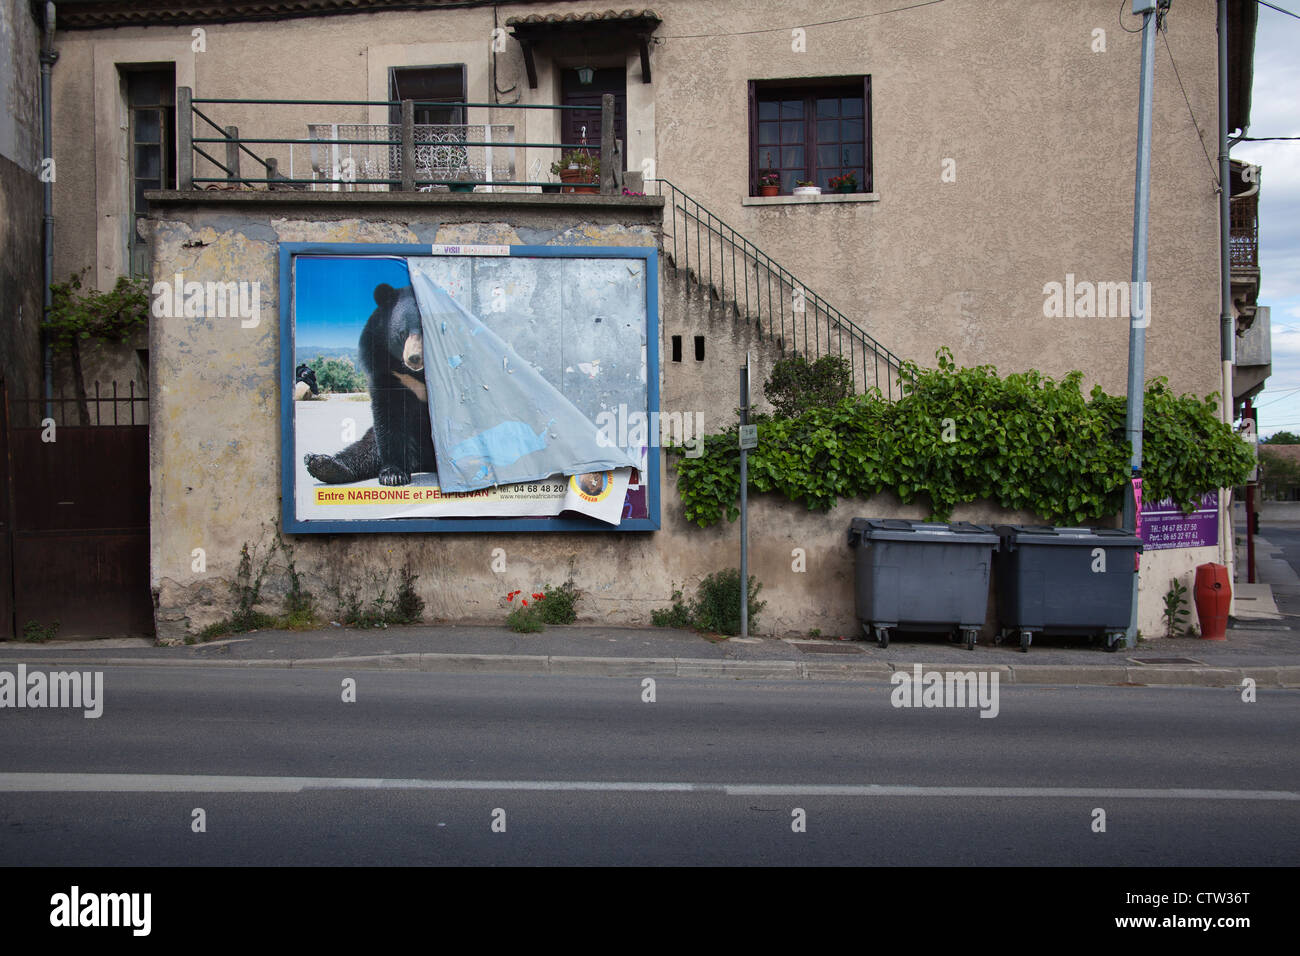 A peeling billboard poster of a bear advertising Narbonne animal park, Montpellier region, France. Stock Photo